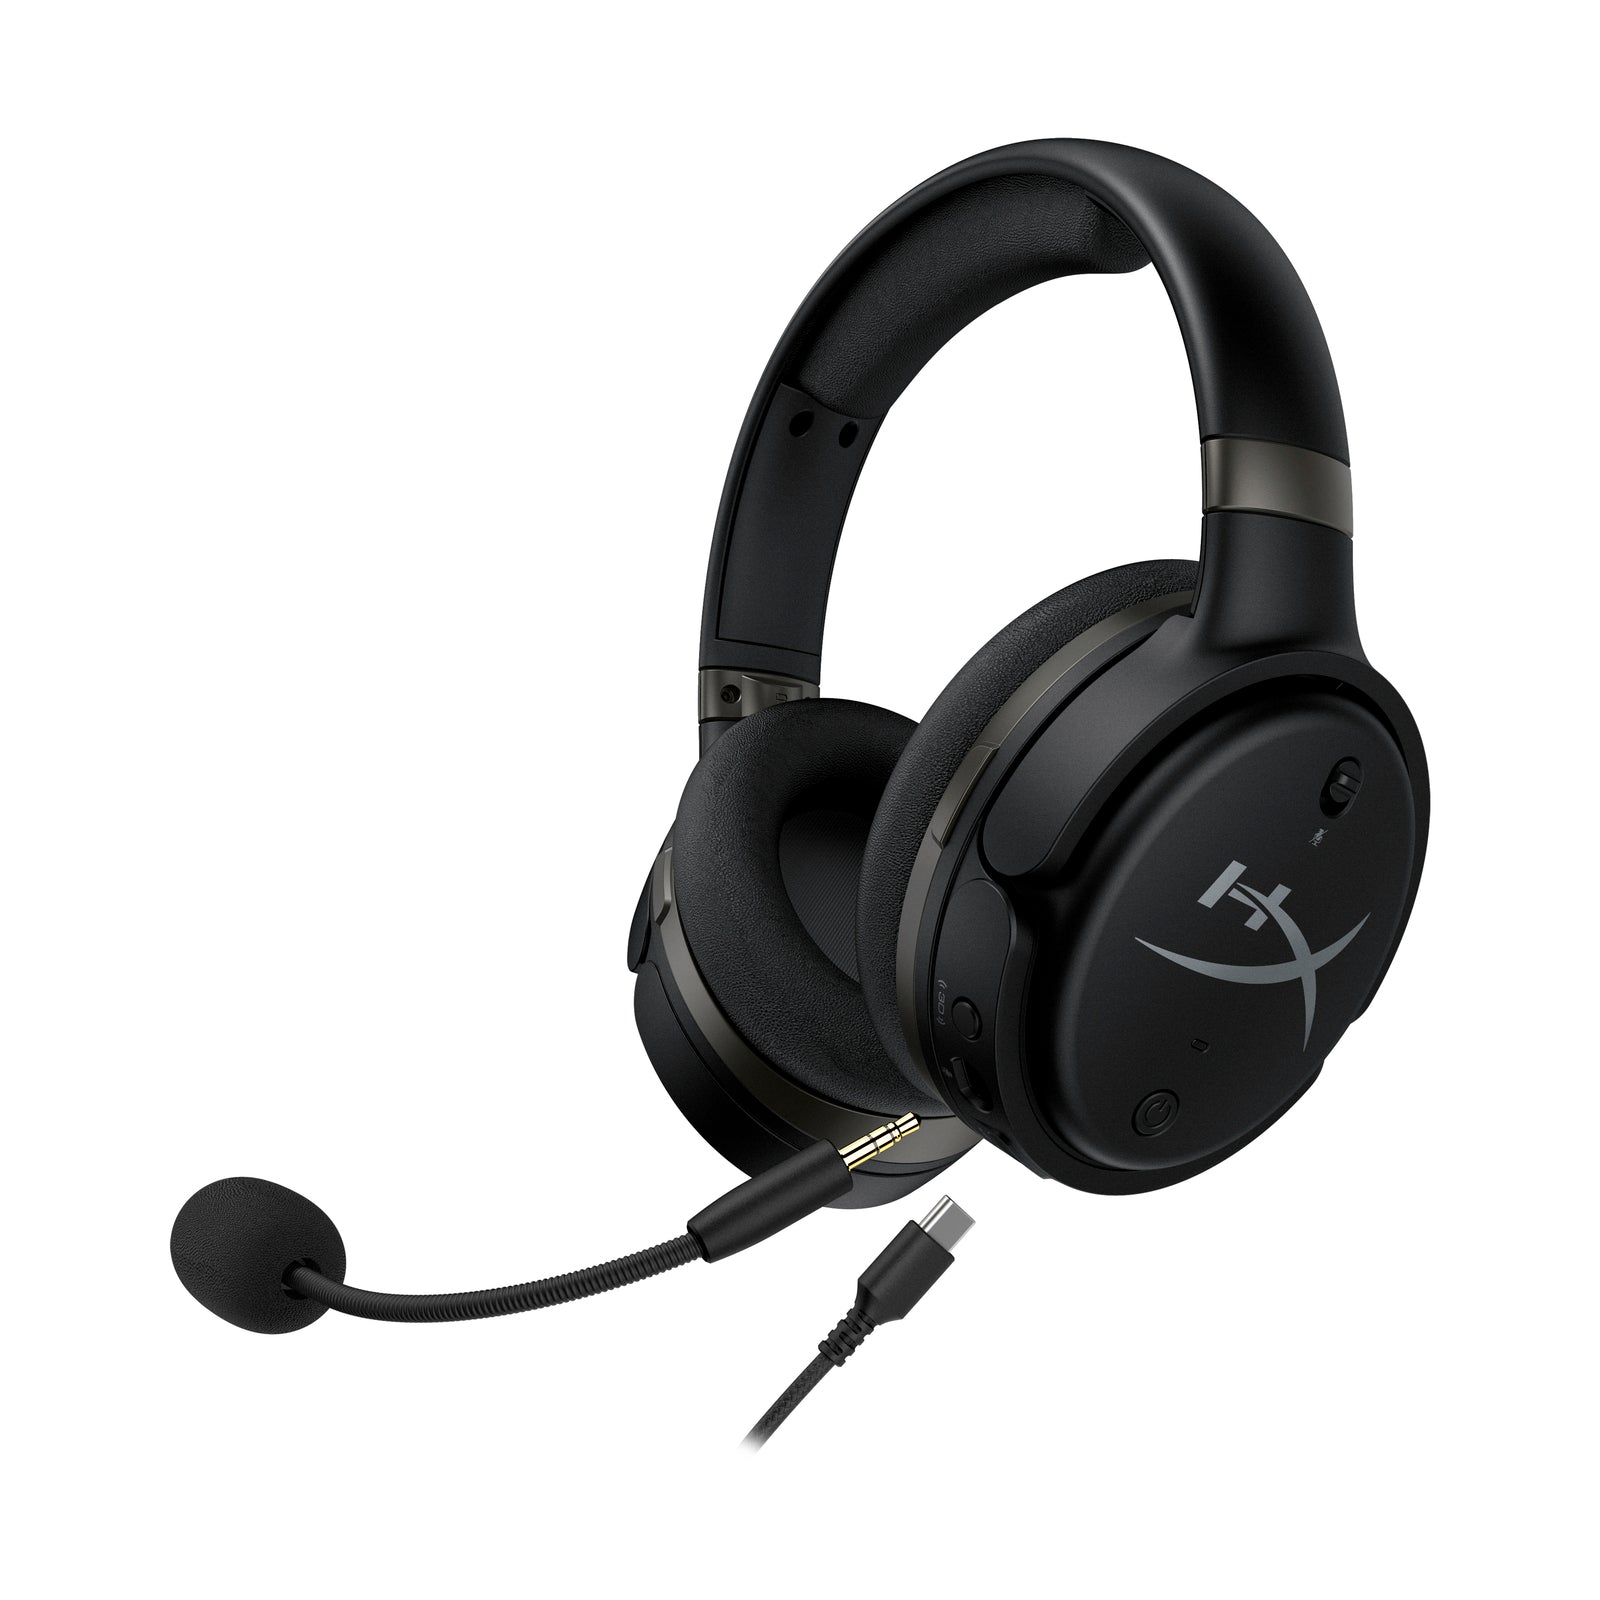 Kingston HyperX Cloud Silver Gaming Headset with Mic